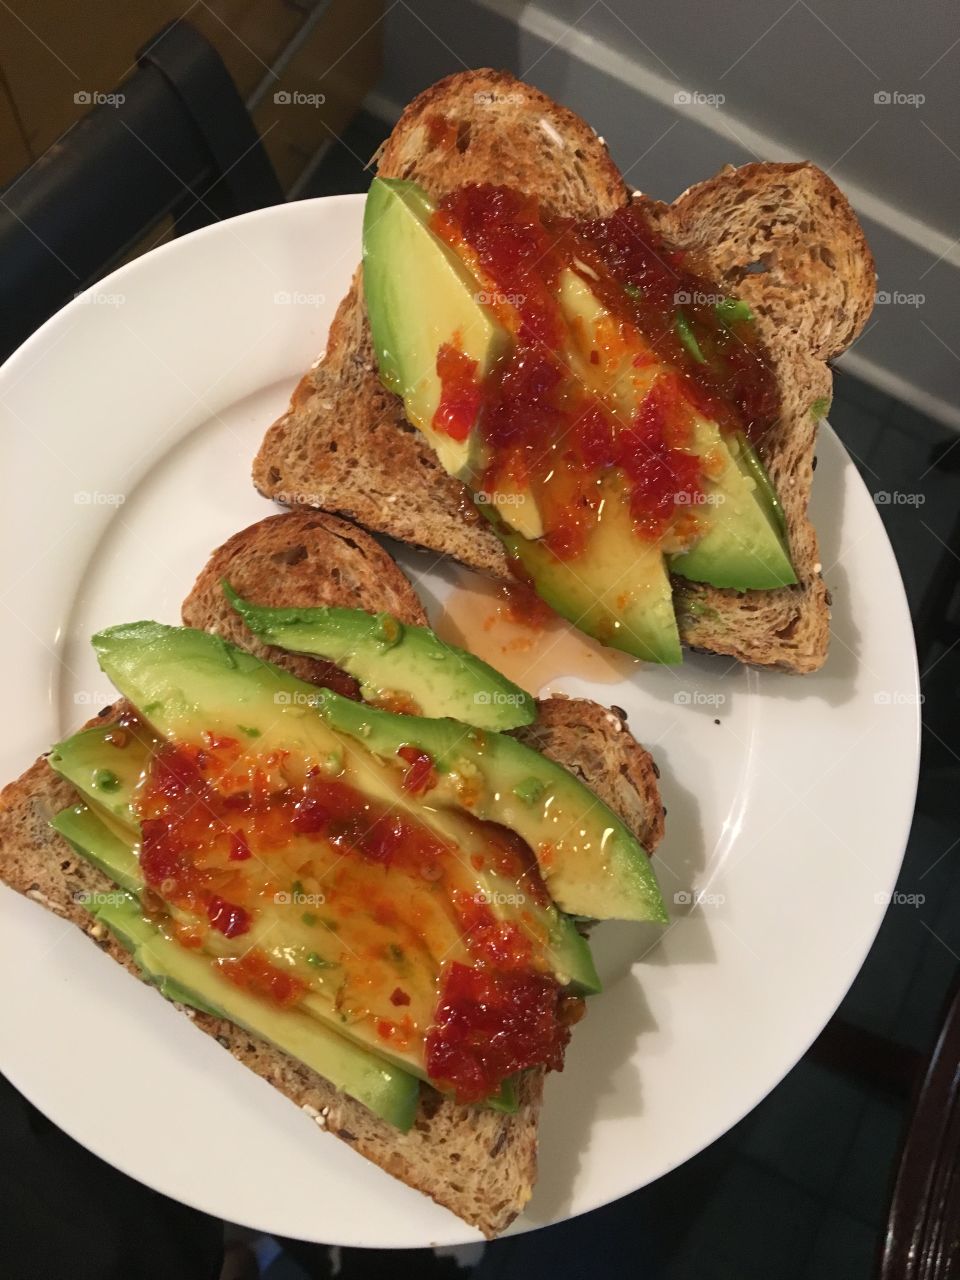 Sprouted grain whole wheat toast with sliced avocado and red pepper jelly. 